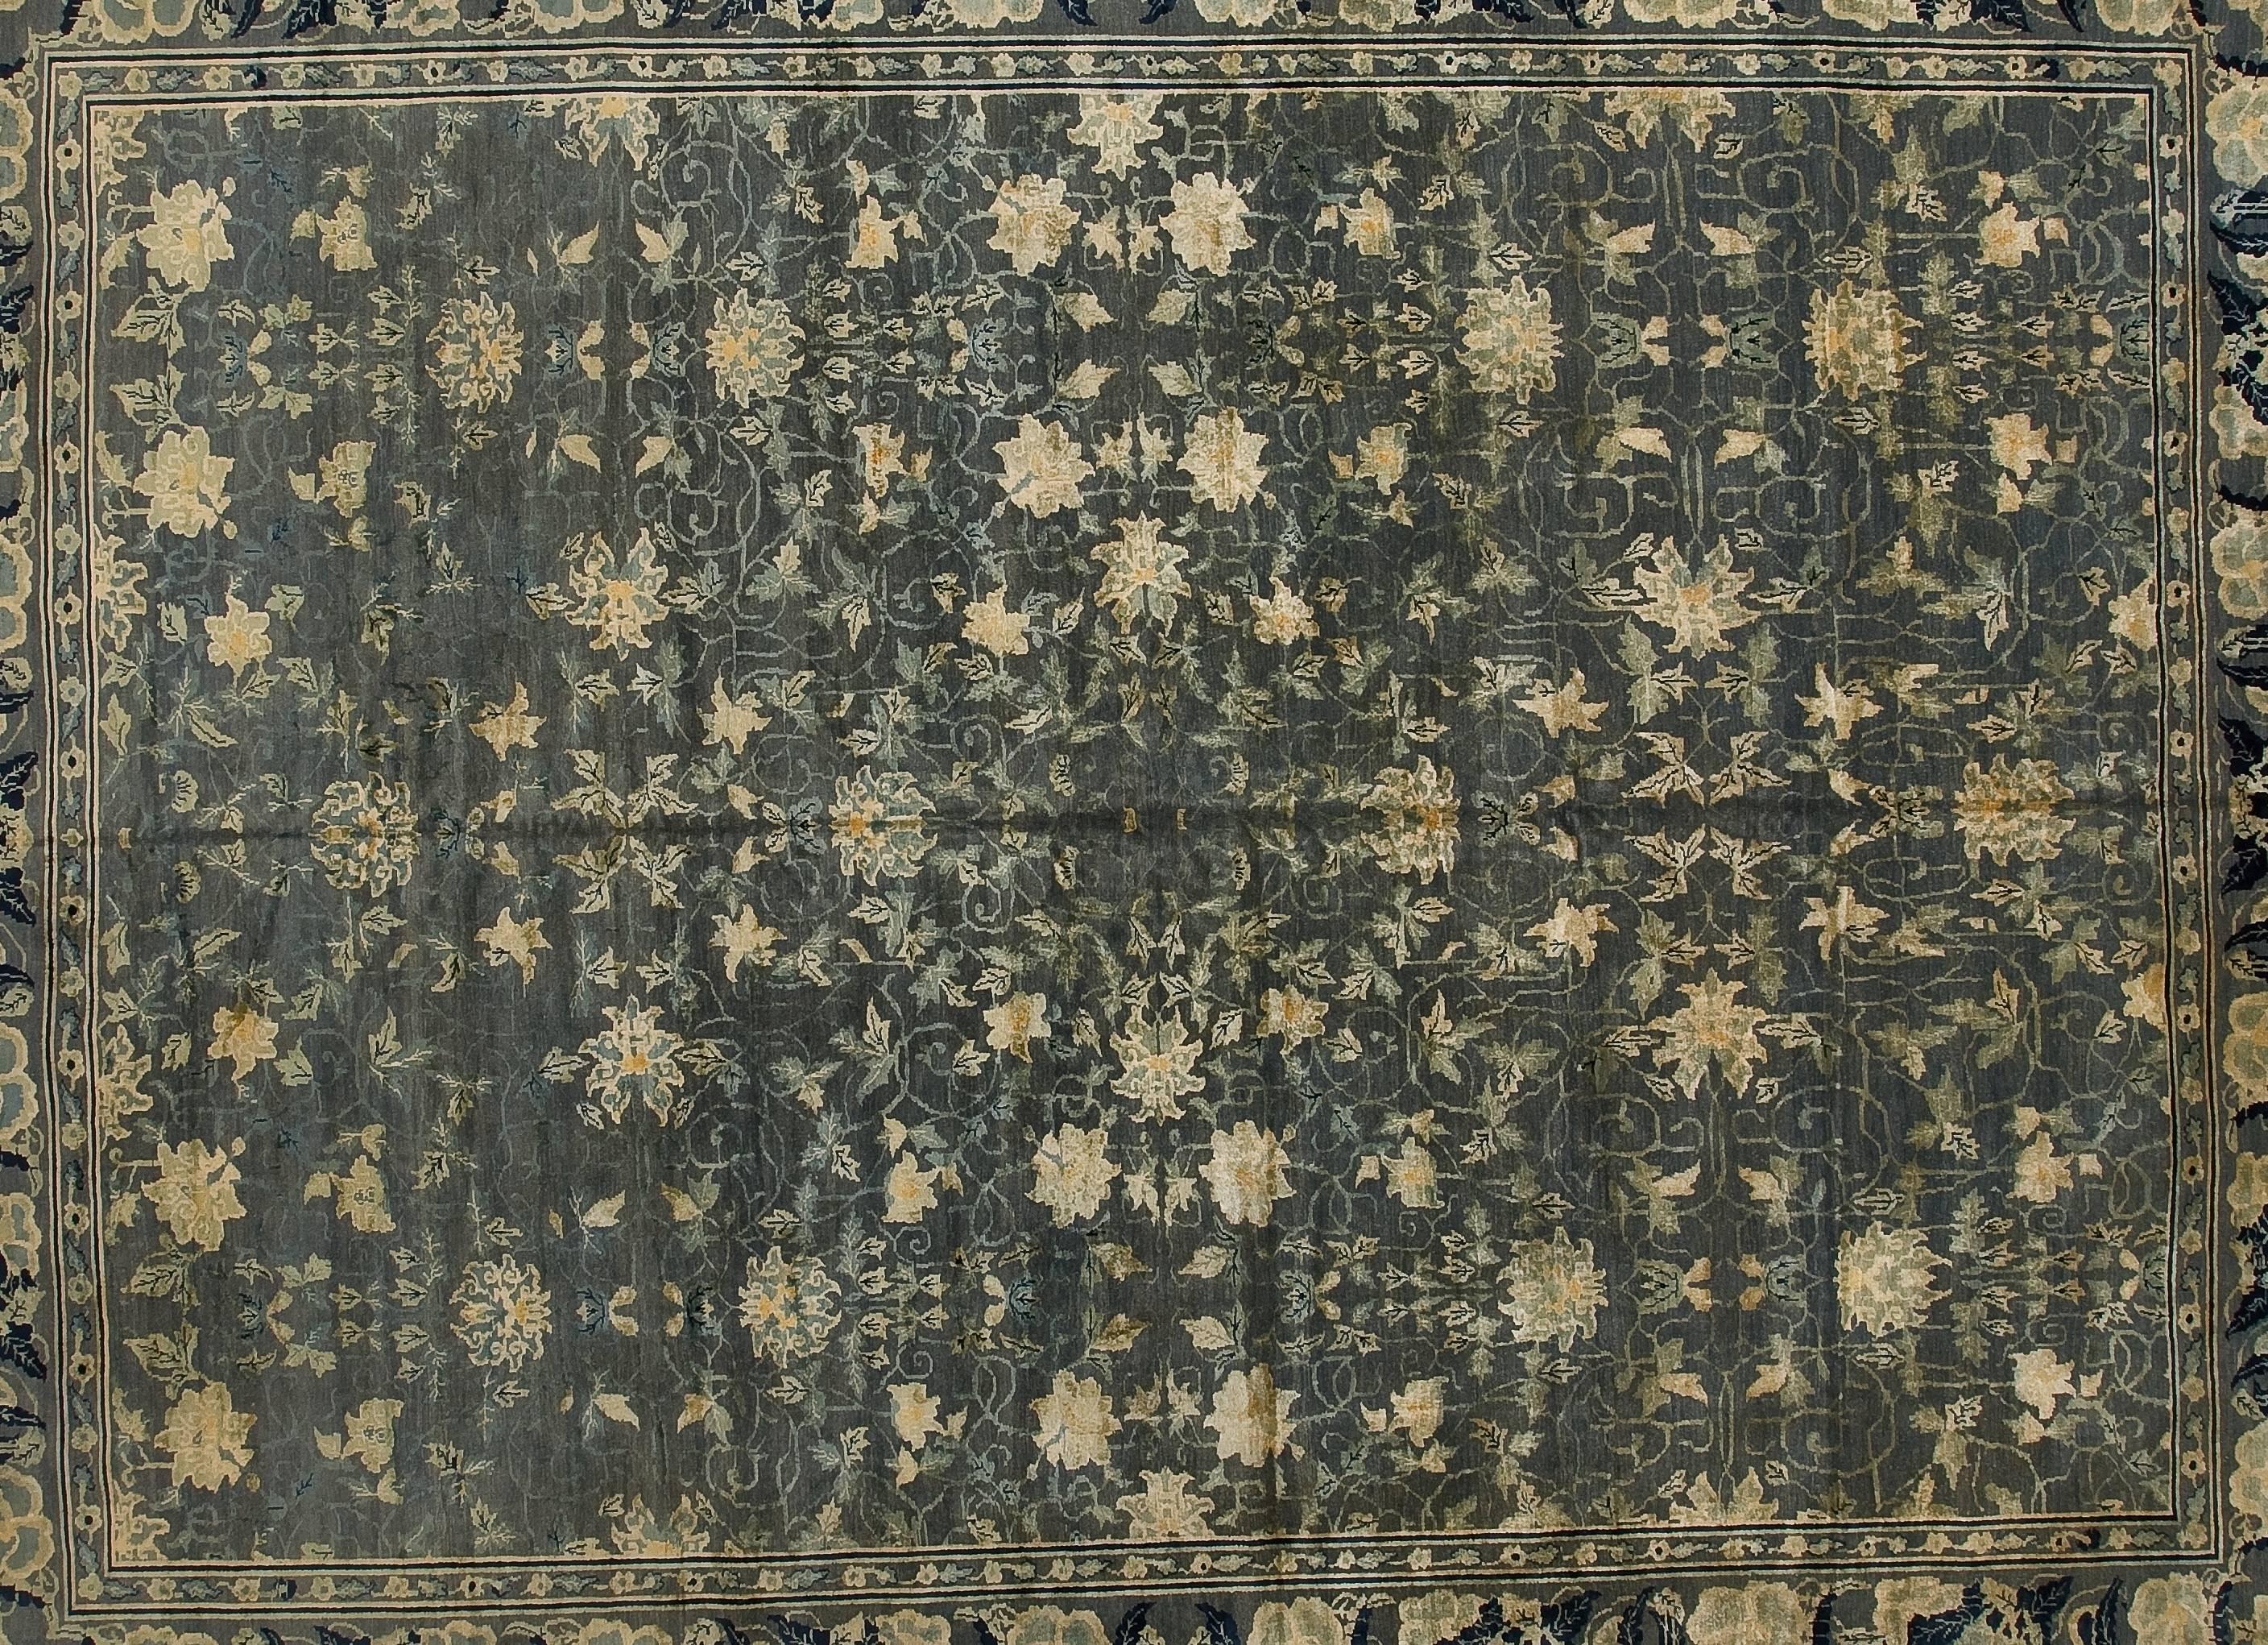 The Antique Oriental Rugs , rugs from Persia (modern day Iran) , India , Caucasian and Anatolian area , are at least 80 years old and represent some of the very finest examples of art from the time and place from which they originate. 
The complex